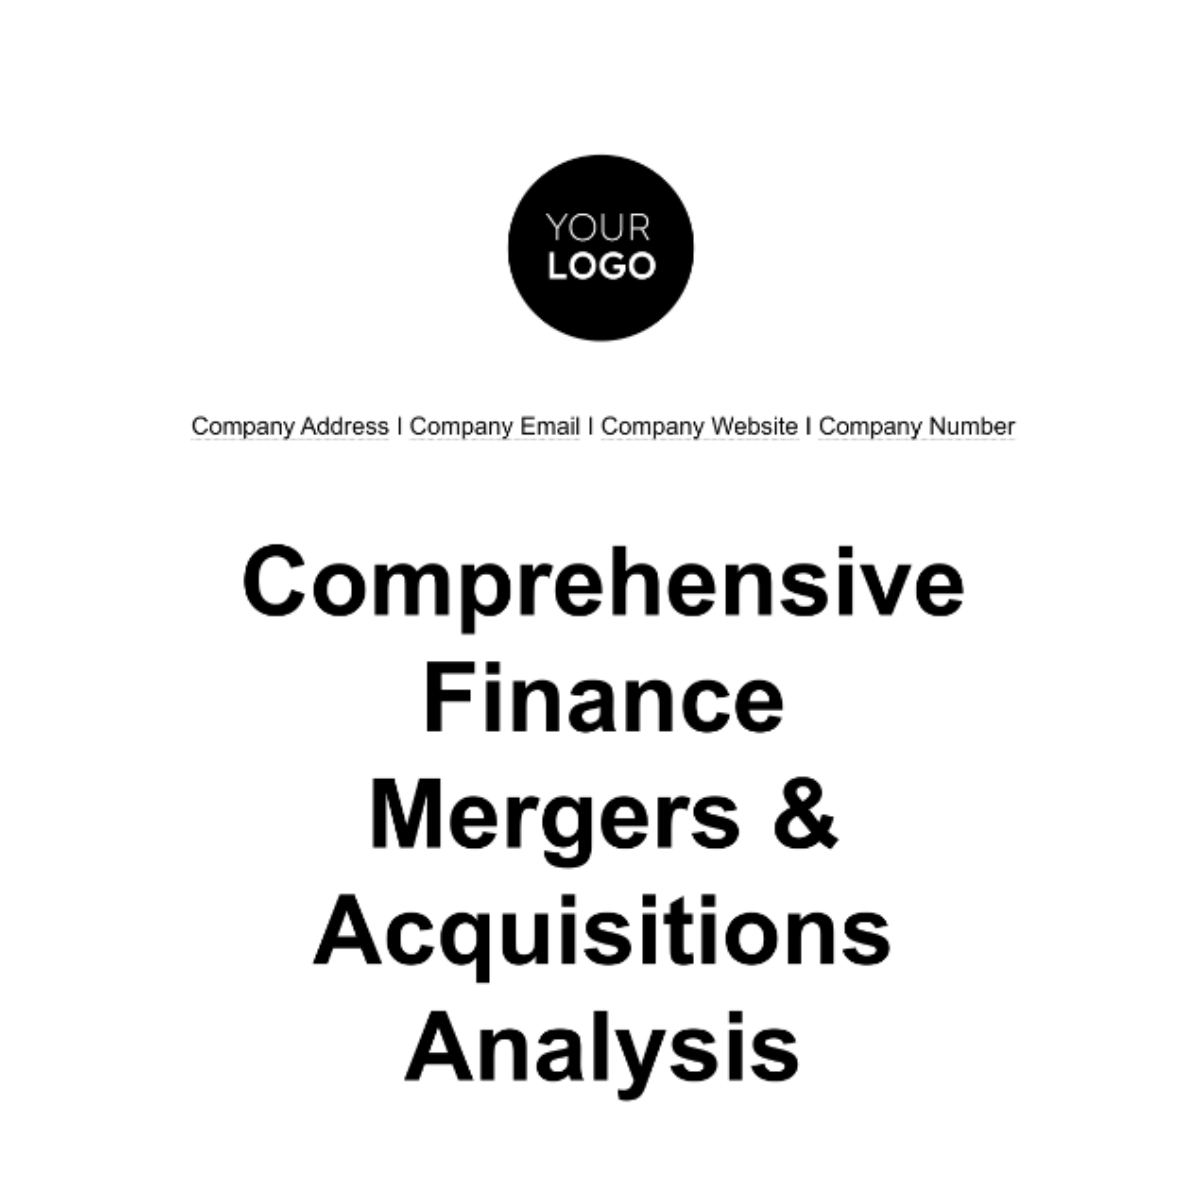 Comprehensive Finance Mergers & Acquisitions Analysis Template